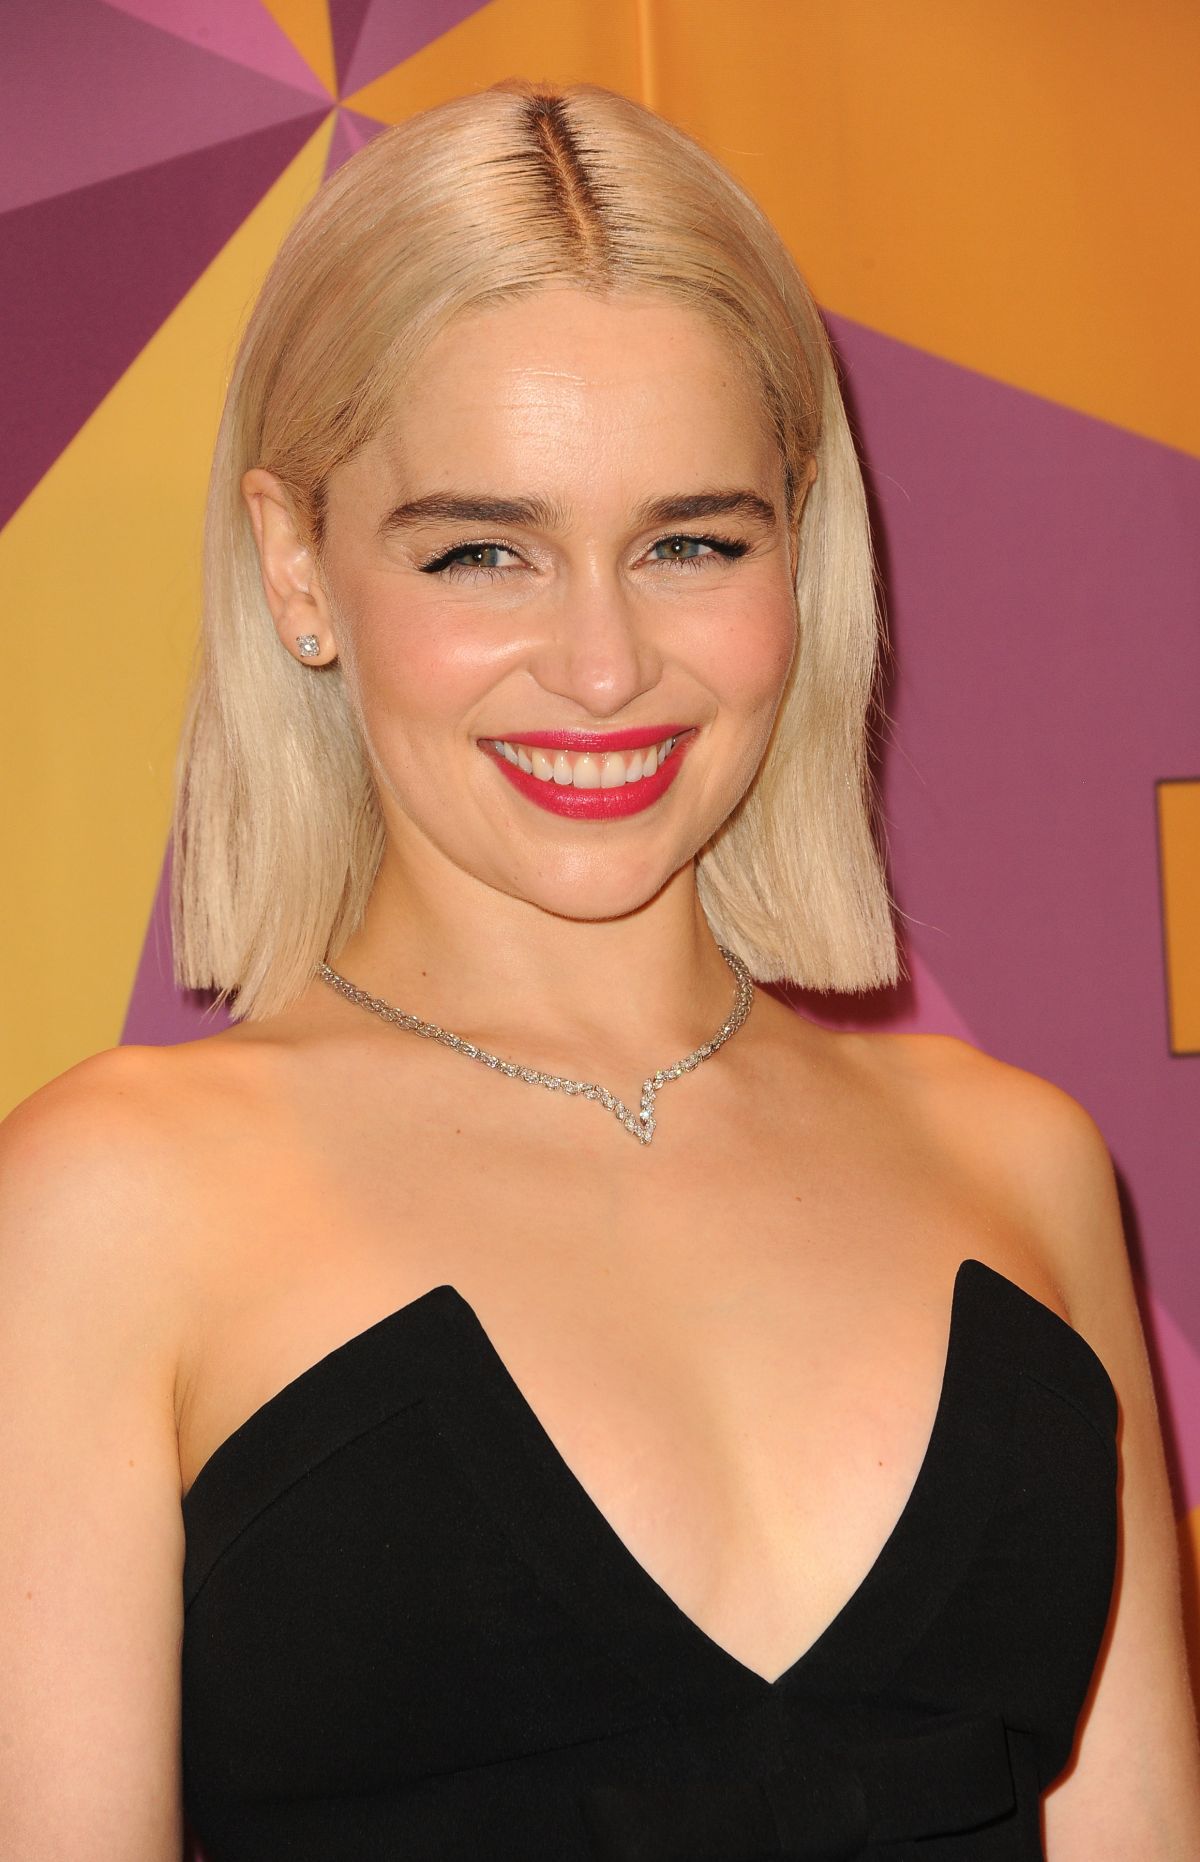 EMILIA CLARKE at HBO’s Golden Globe Awards After-party in Los Angeles ...